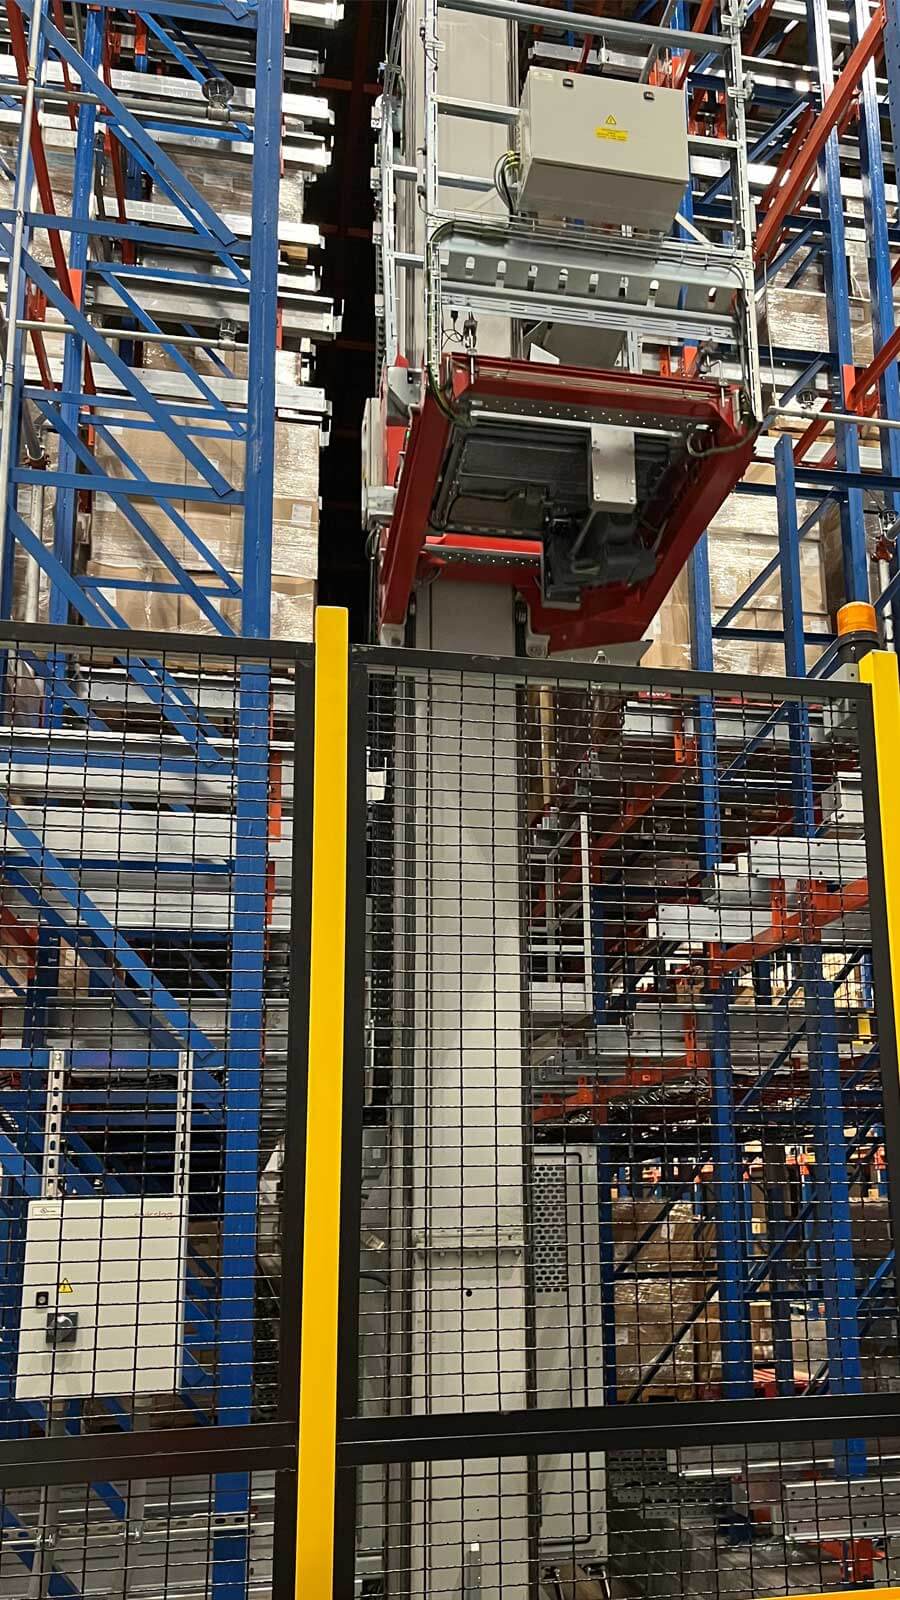 Crane-based AS/RS in temperature-controlled grocery warehouse